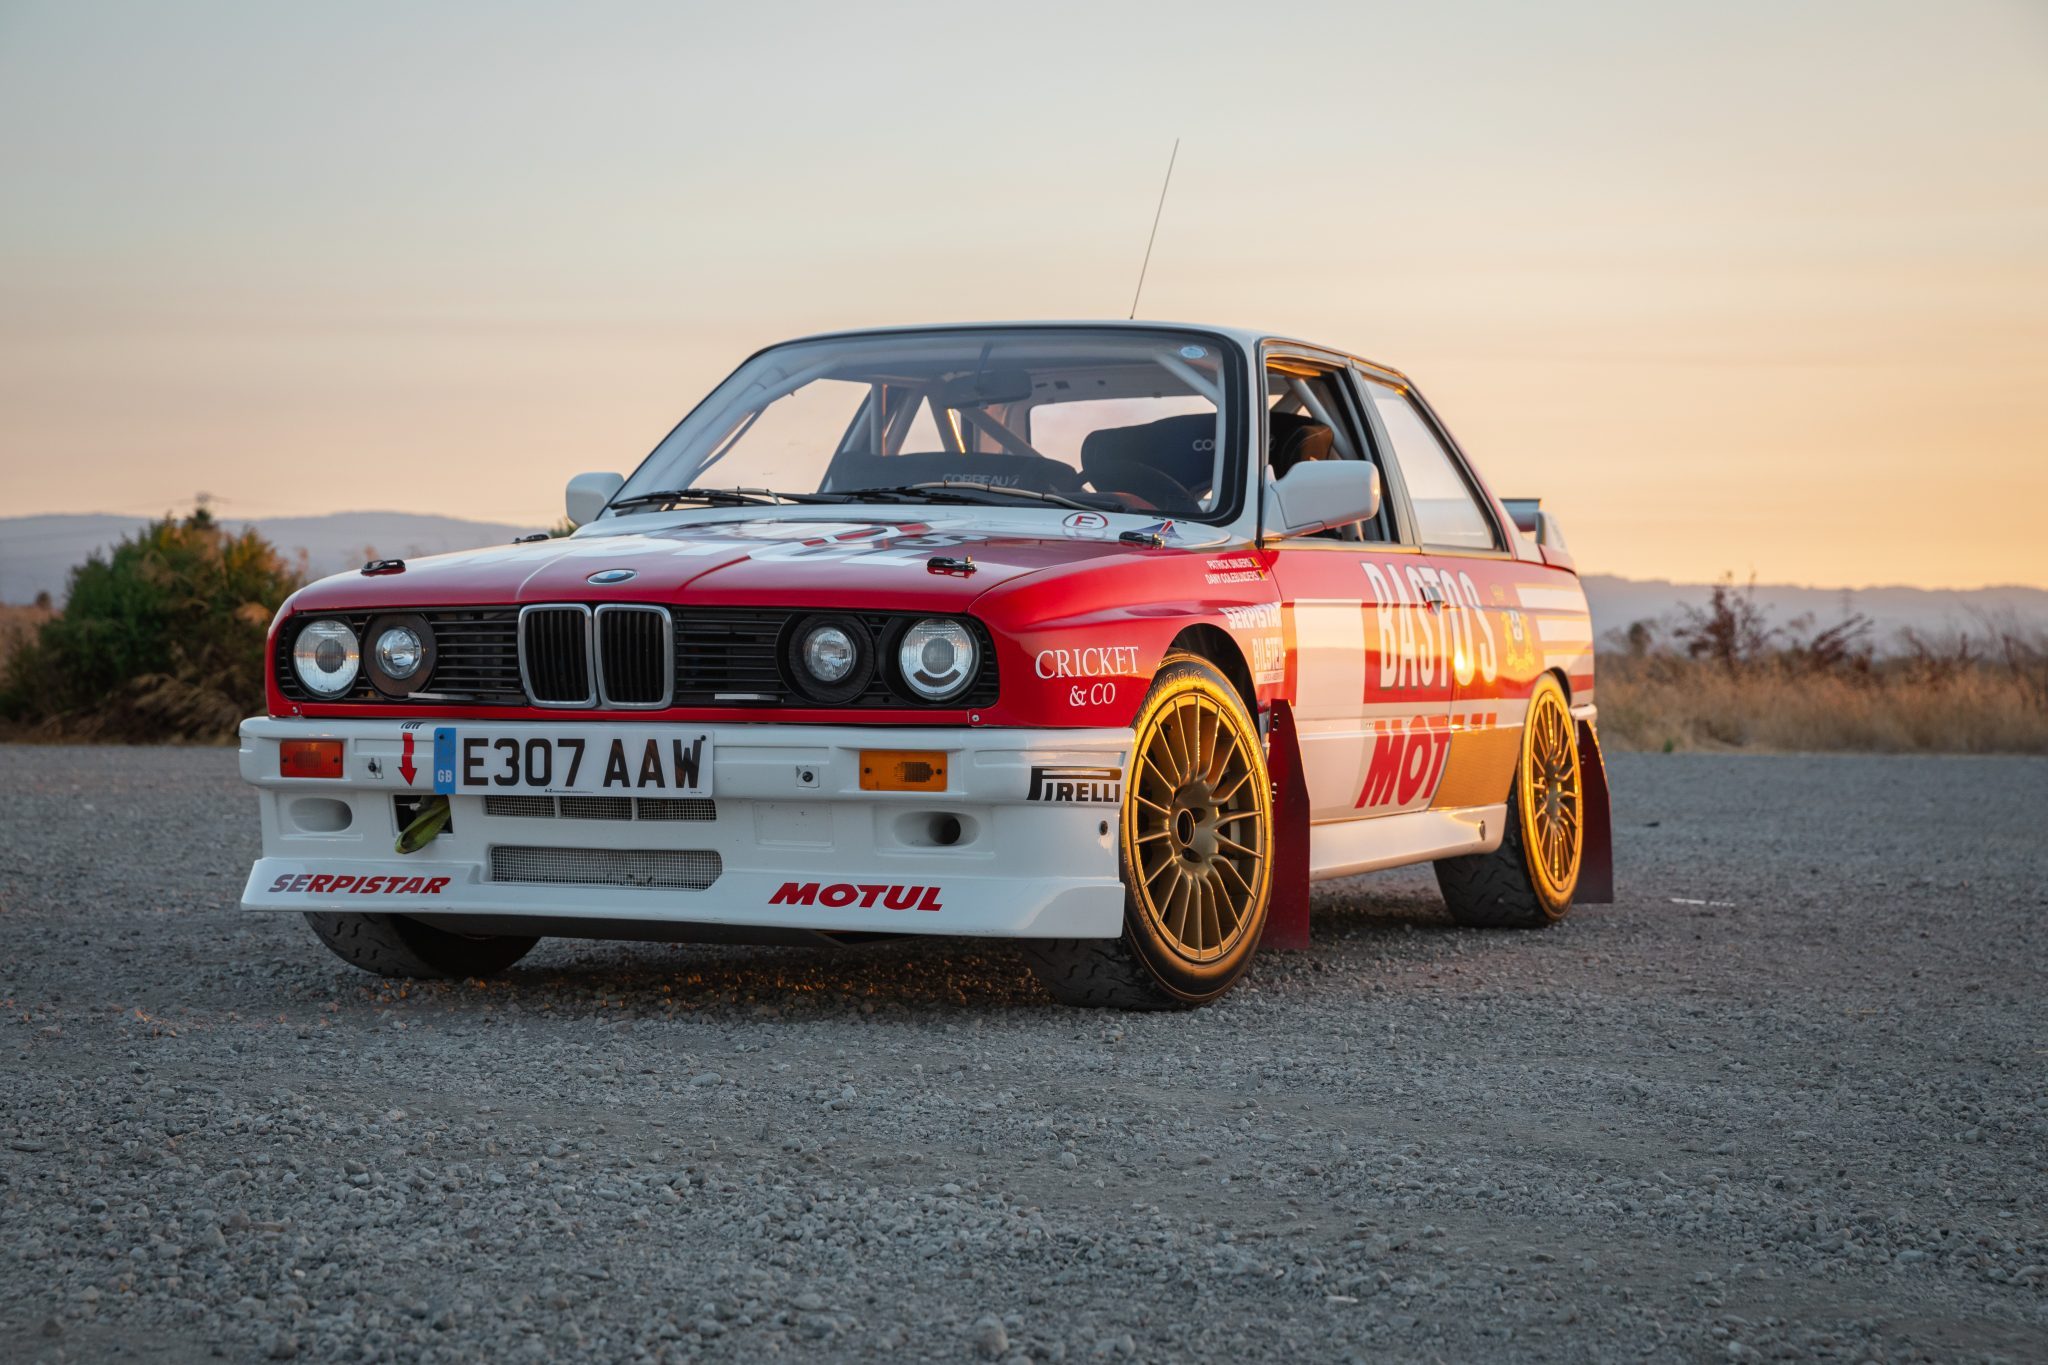 A Bmw M3 0 Race Version Is Cheaper Than Its Street Legal Brother Autoevolution